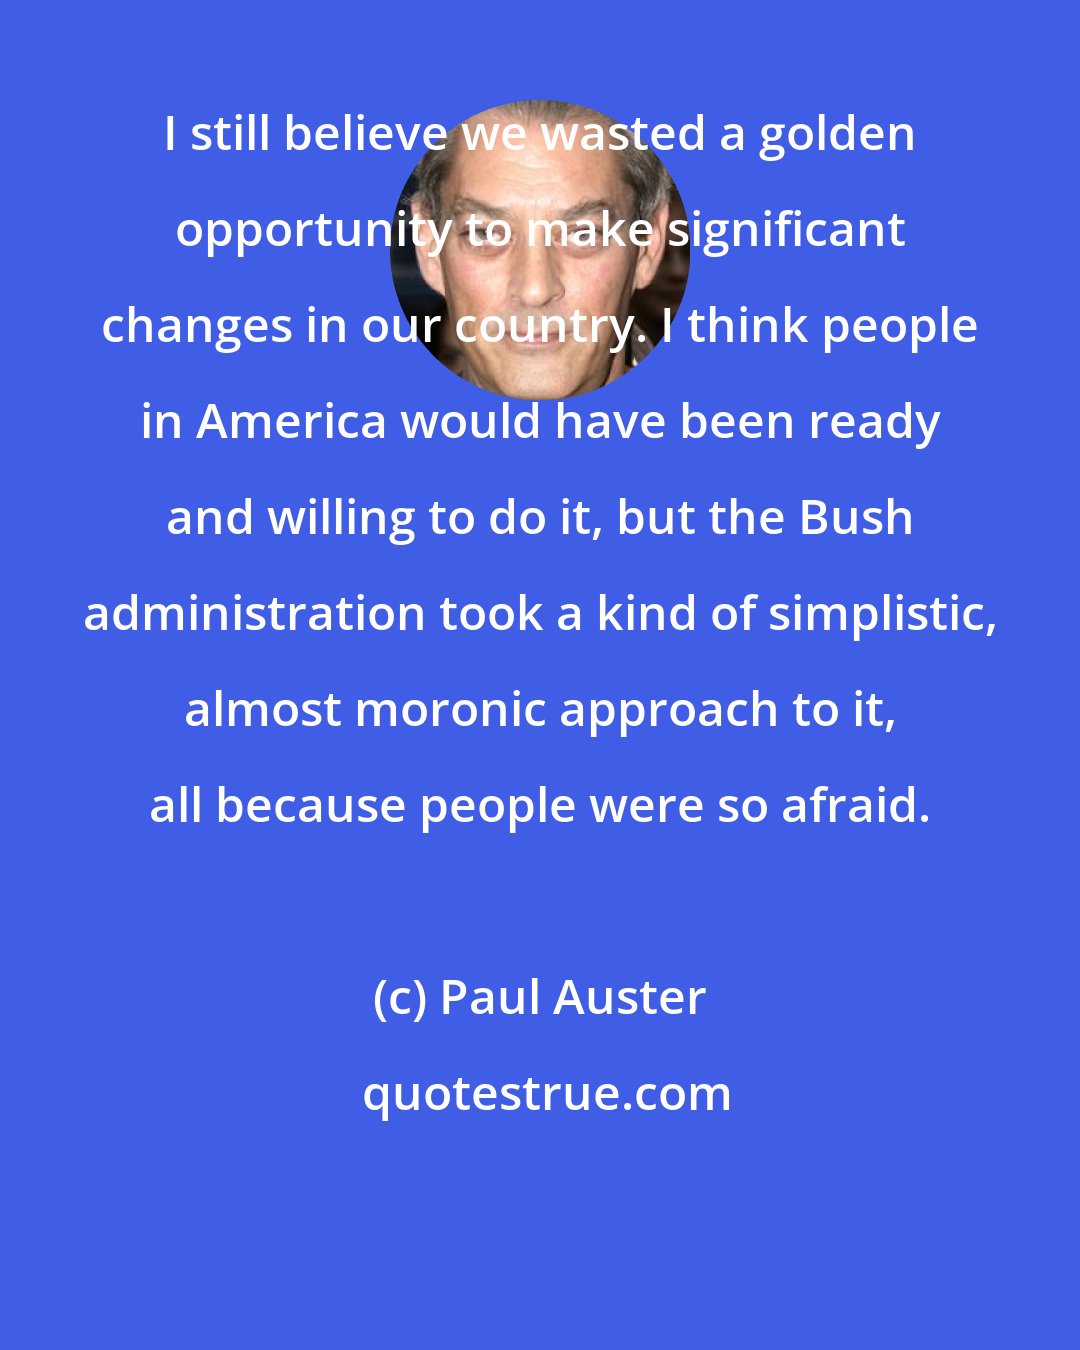 Paul Auster: I still believe we wasted a golden opportunity to make significant changes in our country. I think people in America would have been ready and willing to do it, but the Bush administration took a kind of simplistic, almost moronic approach to it, all because people were so afraid.